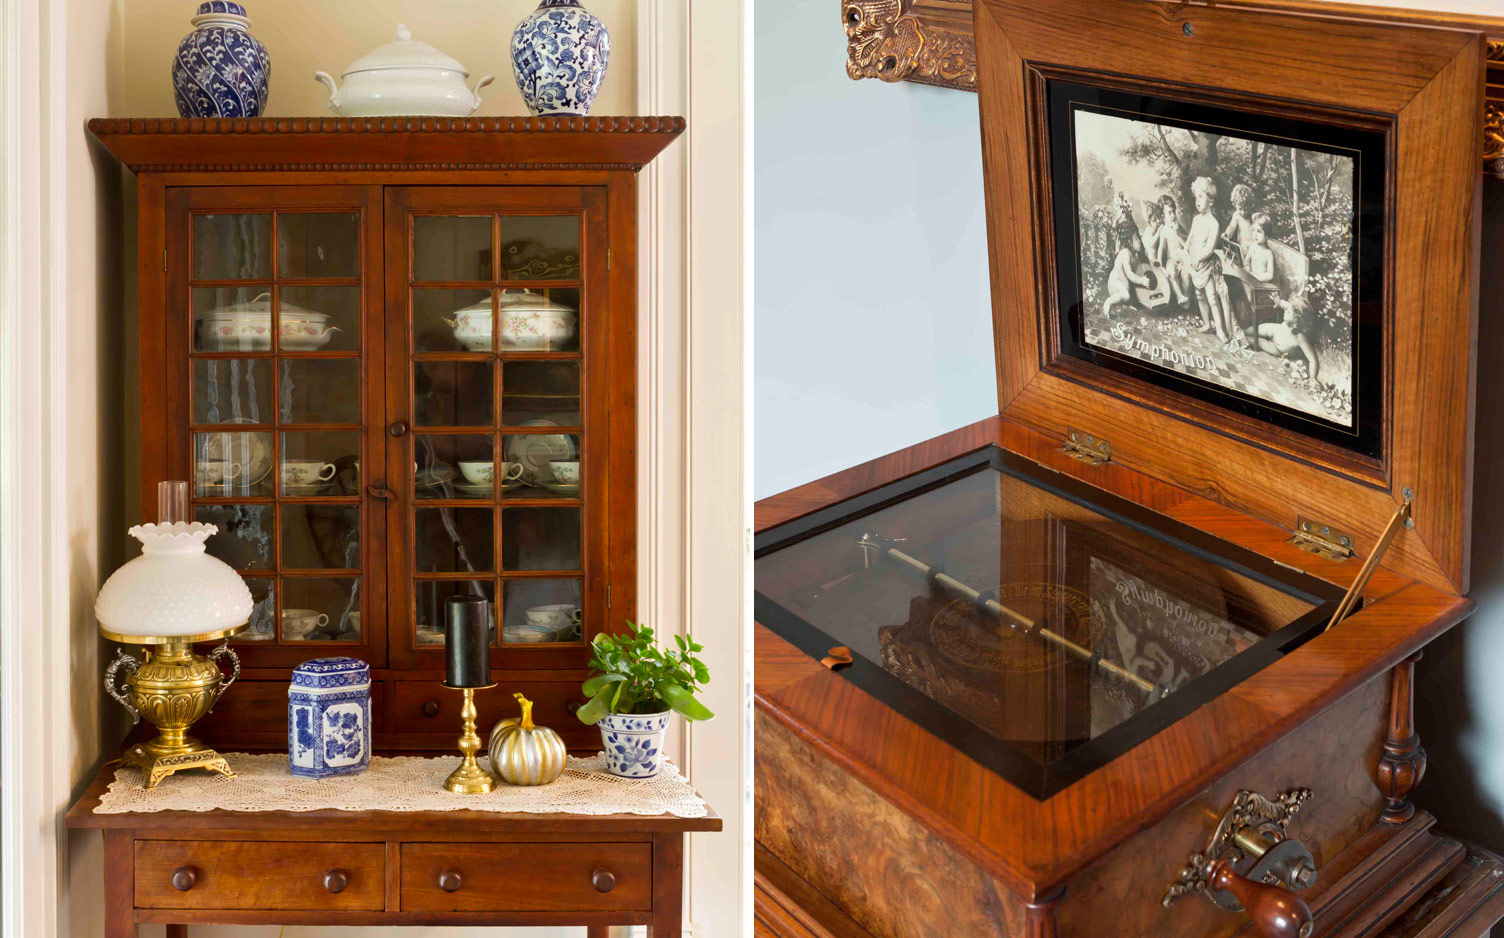 A New Home Rich in Antiques - southernladymagazine.com